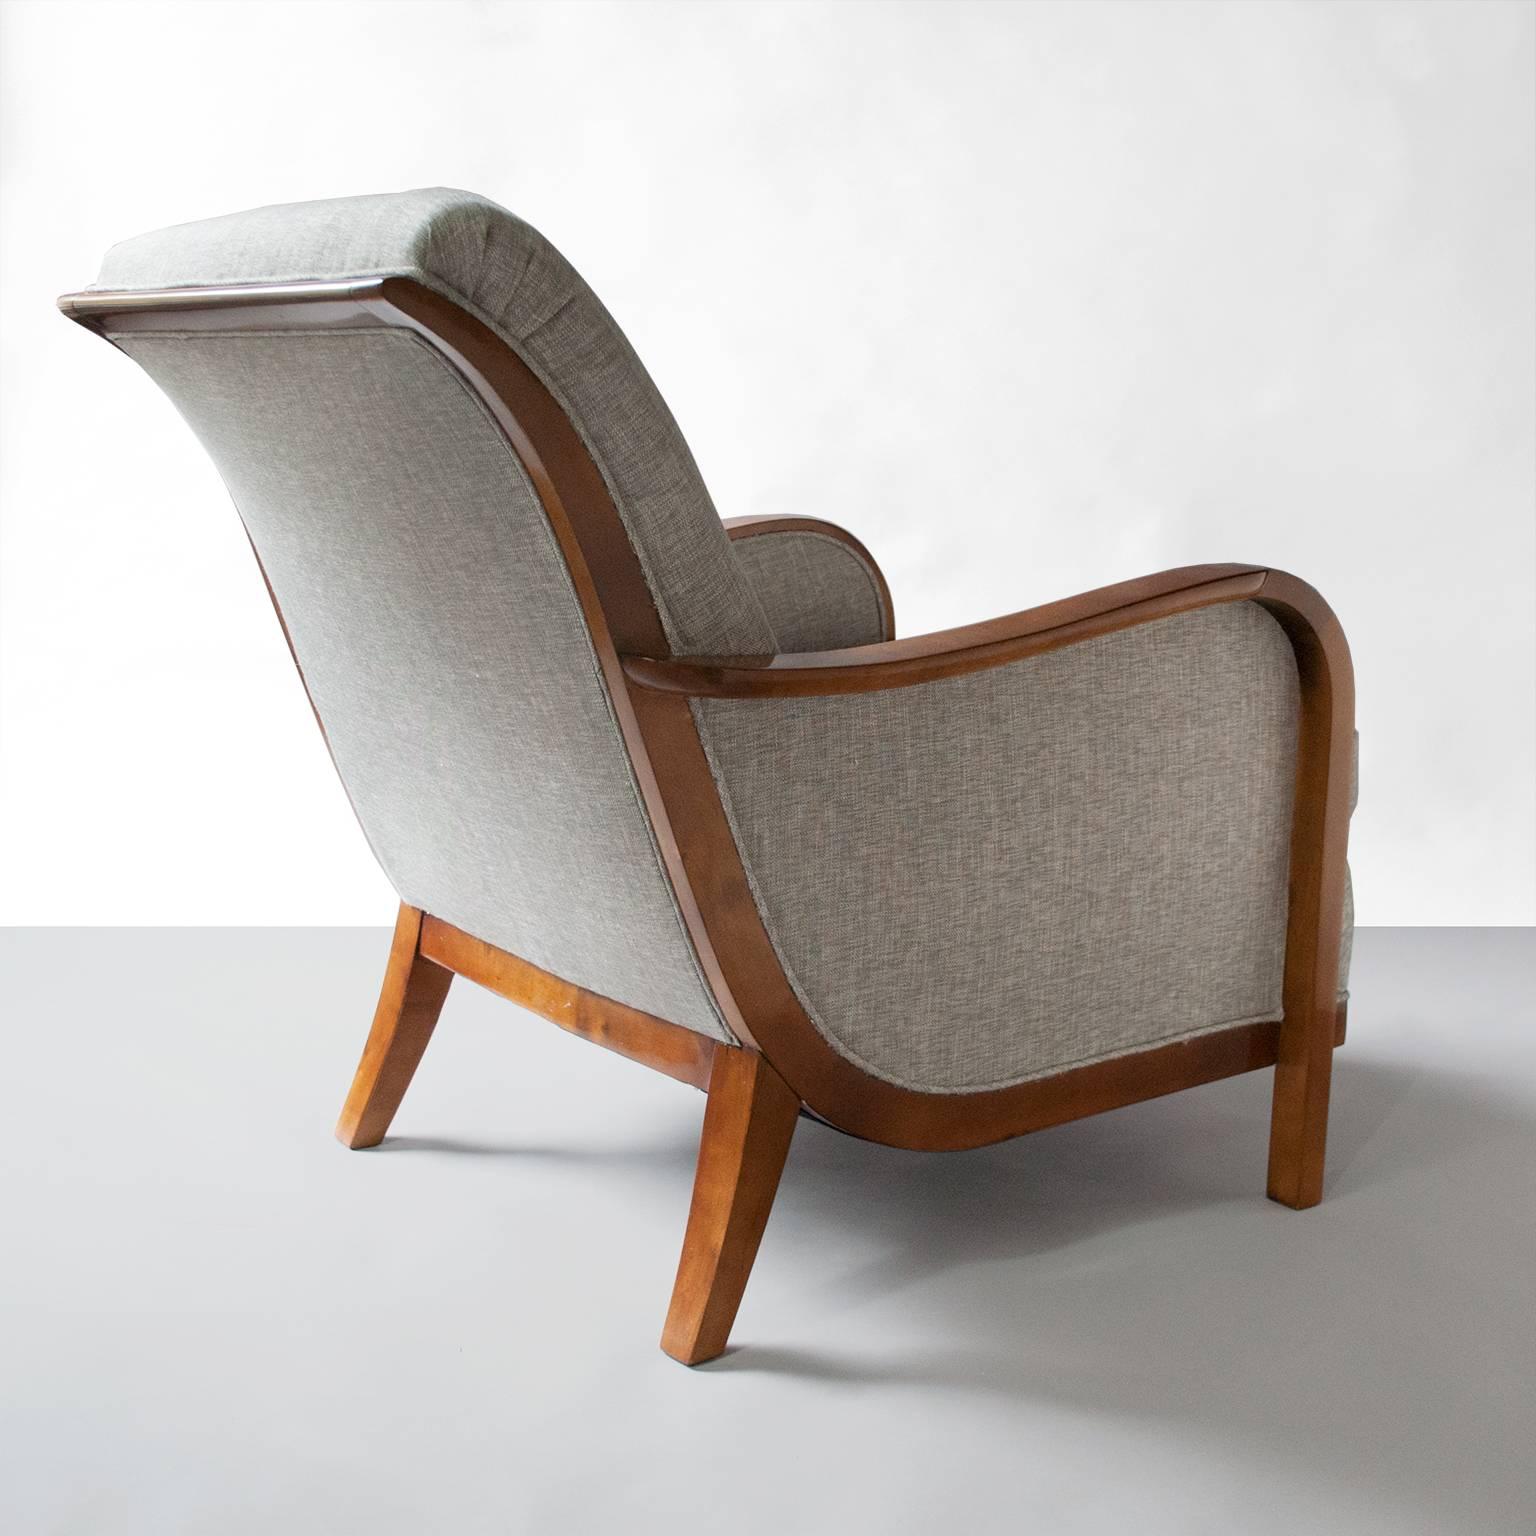 Stained Swedish Art Deco Lounge Chair by Wilhelm Knoll, Malmo 1933